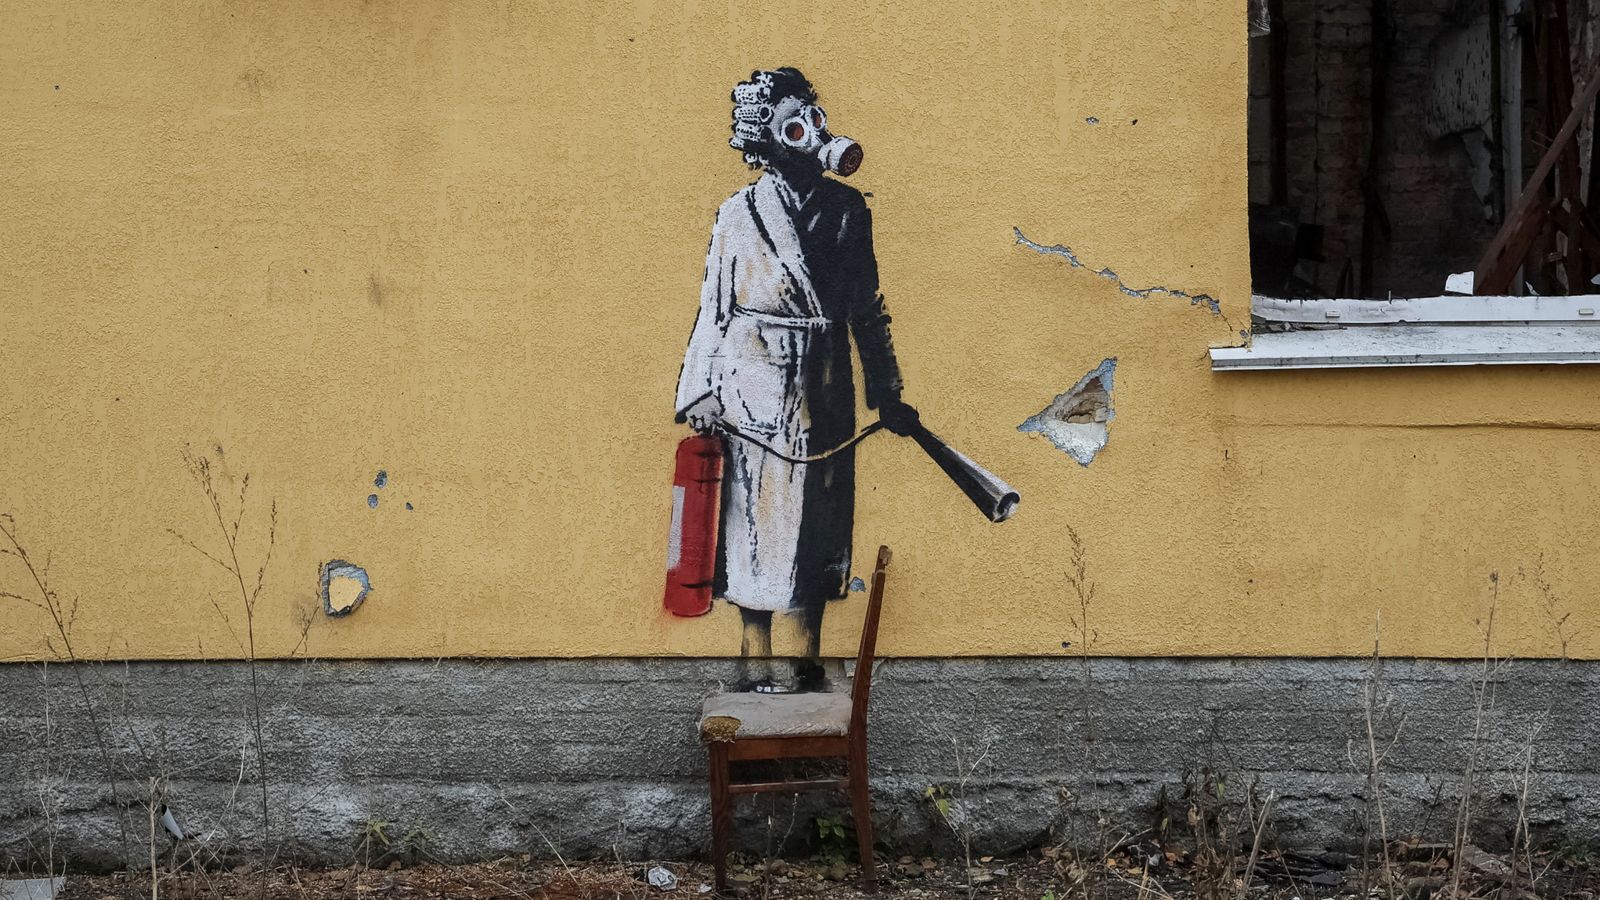 Group try to steal Banksy mural from wall in Ukrainian town | World News